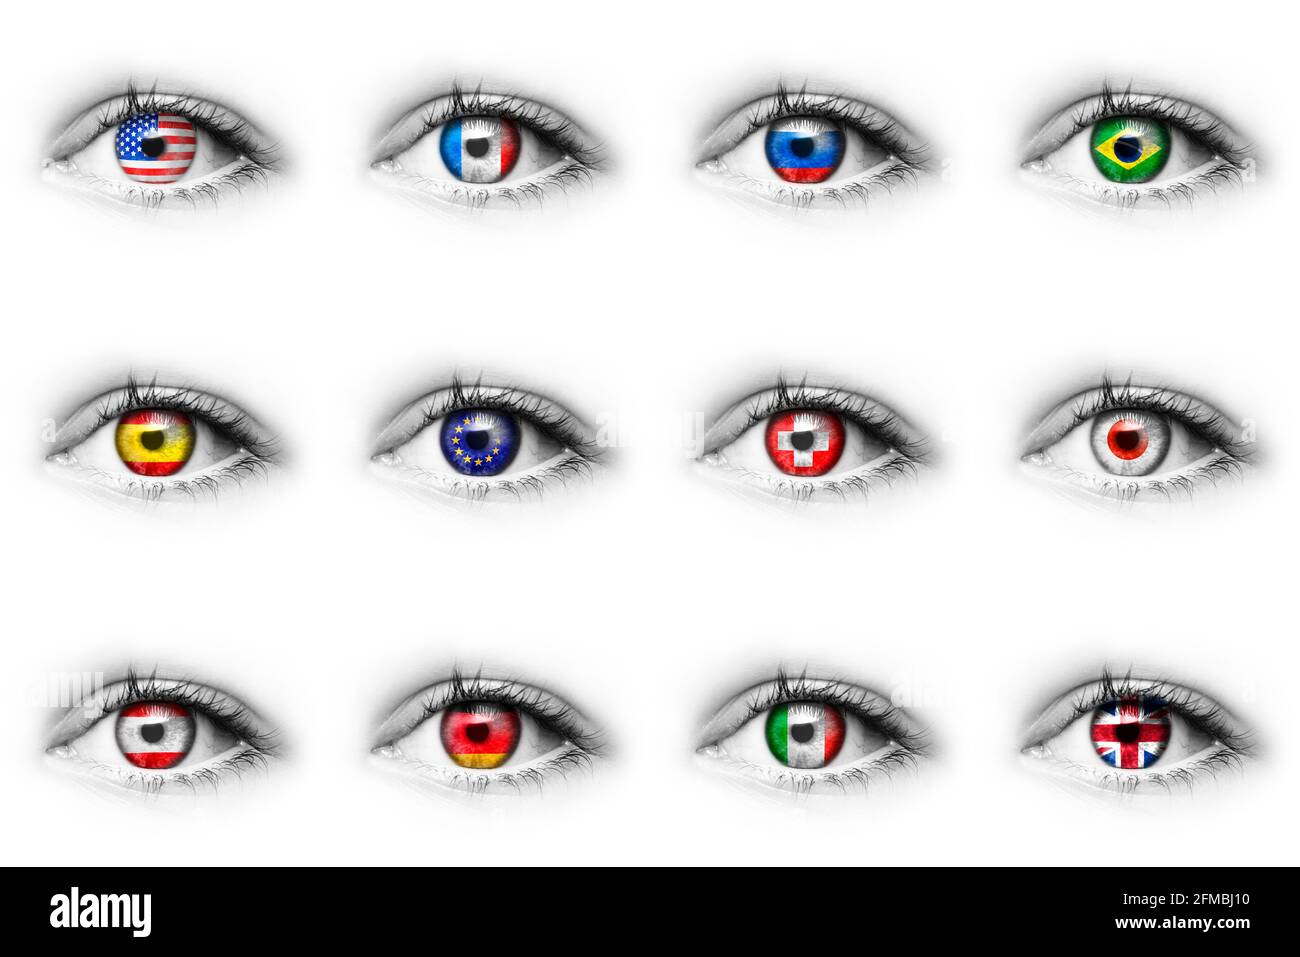 Eye with various national flags in the iris Stock Photo